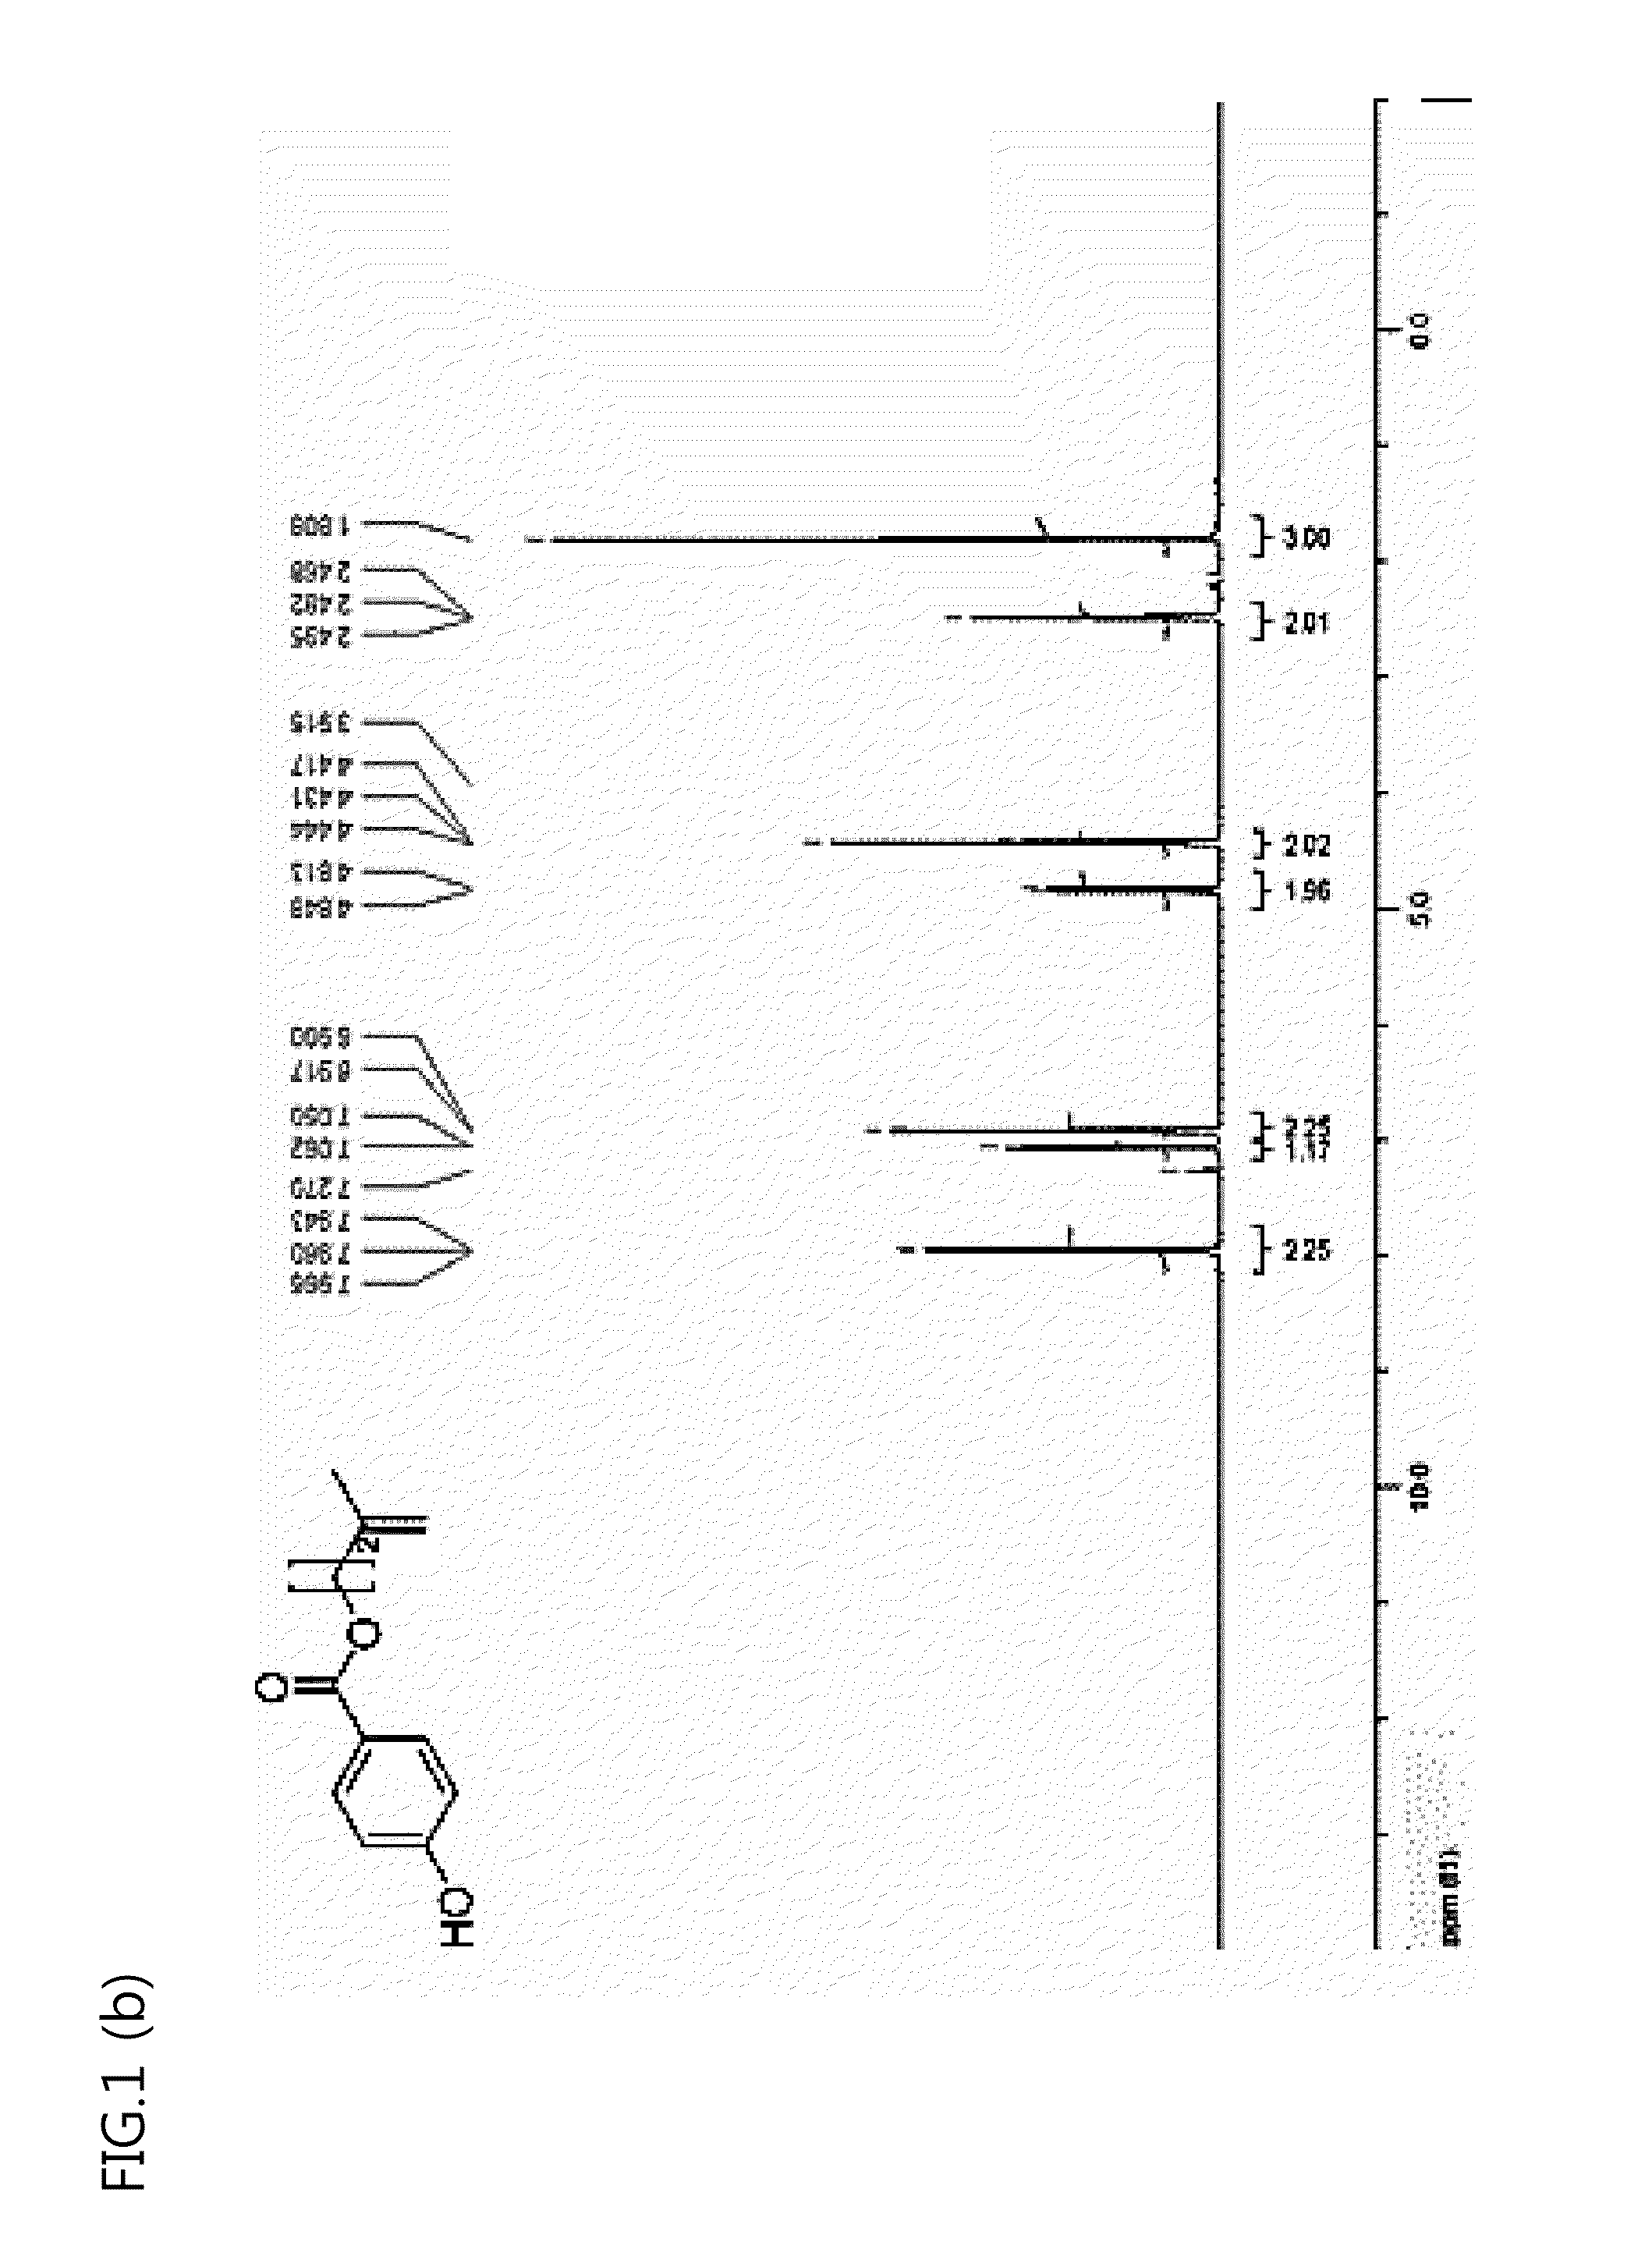 Polyorganosiloxane compound, method for preparing the same, and copolycarbonate resin comprising the same